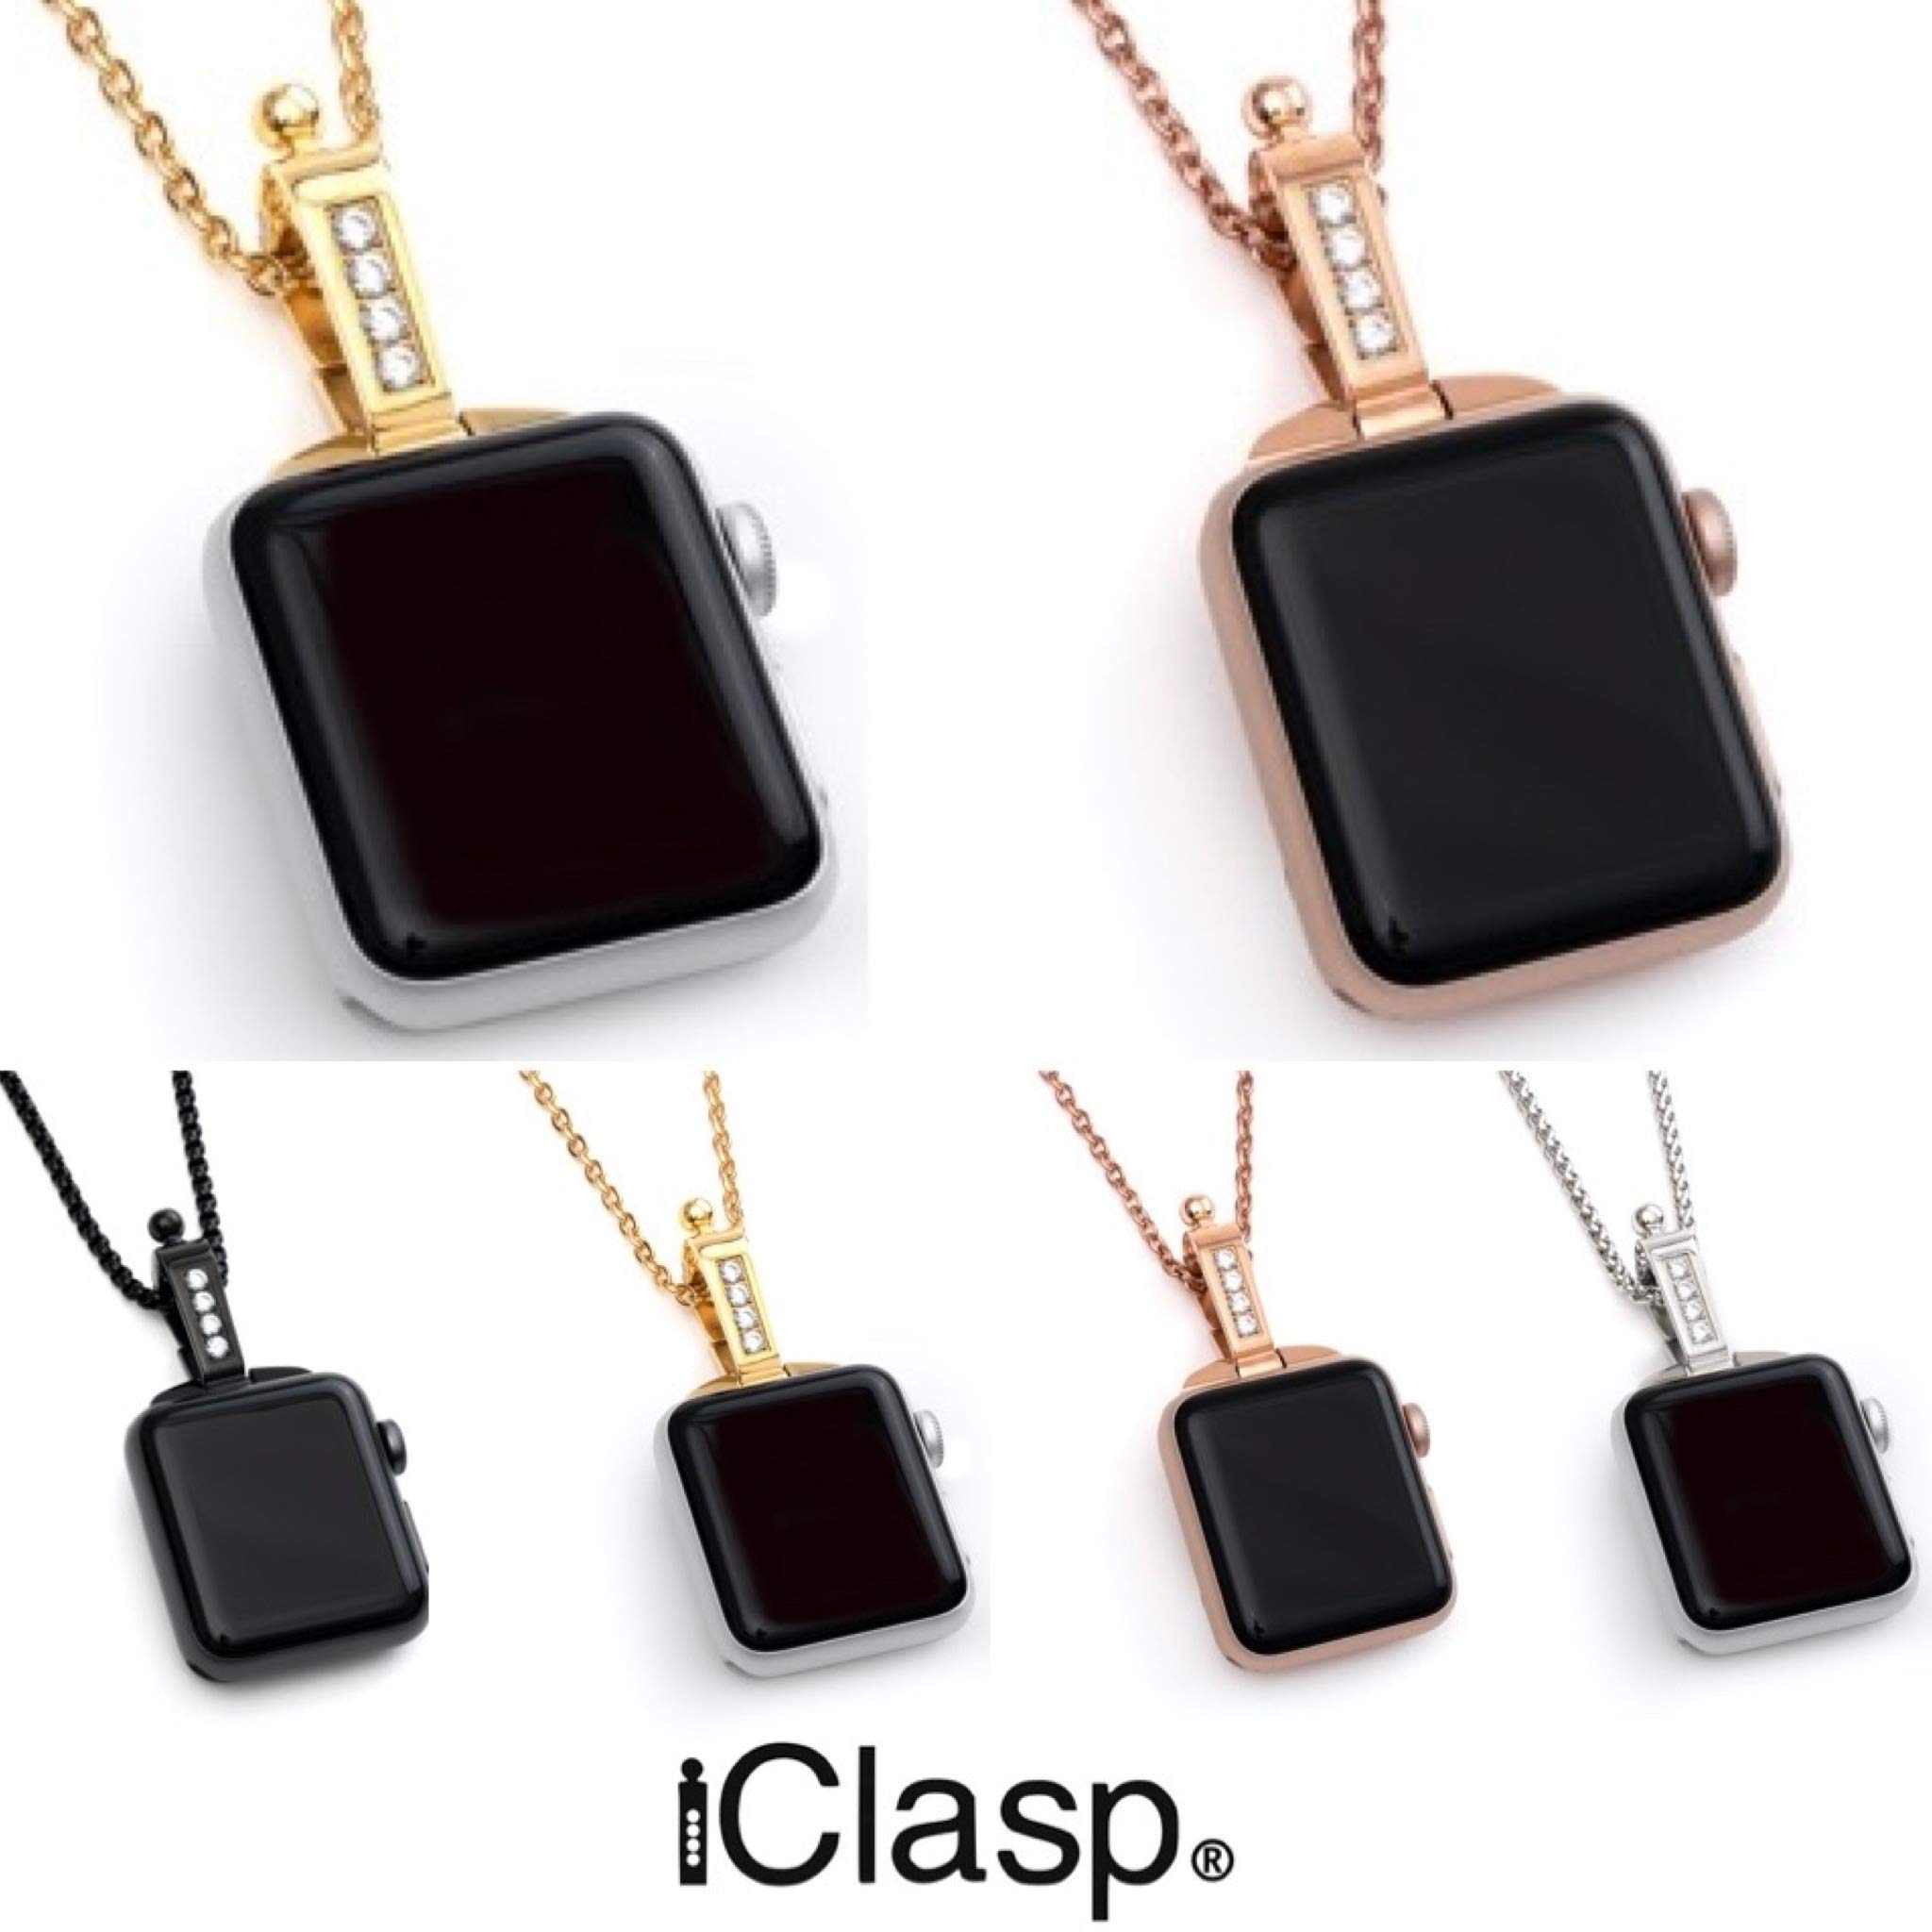 iClasp - Pendant Adapter Accessory Compatible With Apple Watch - Wear with Included 30